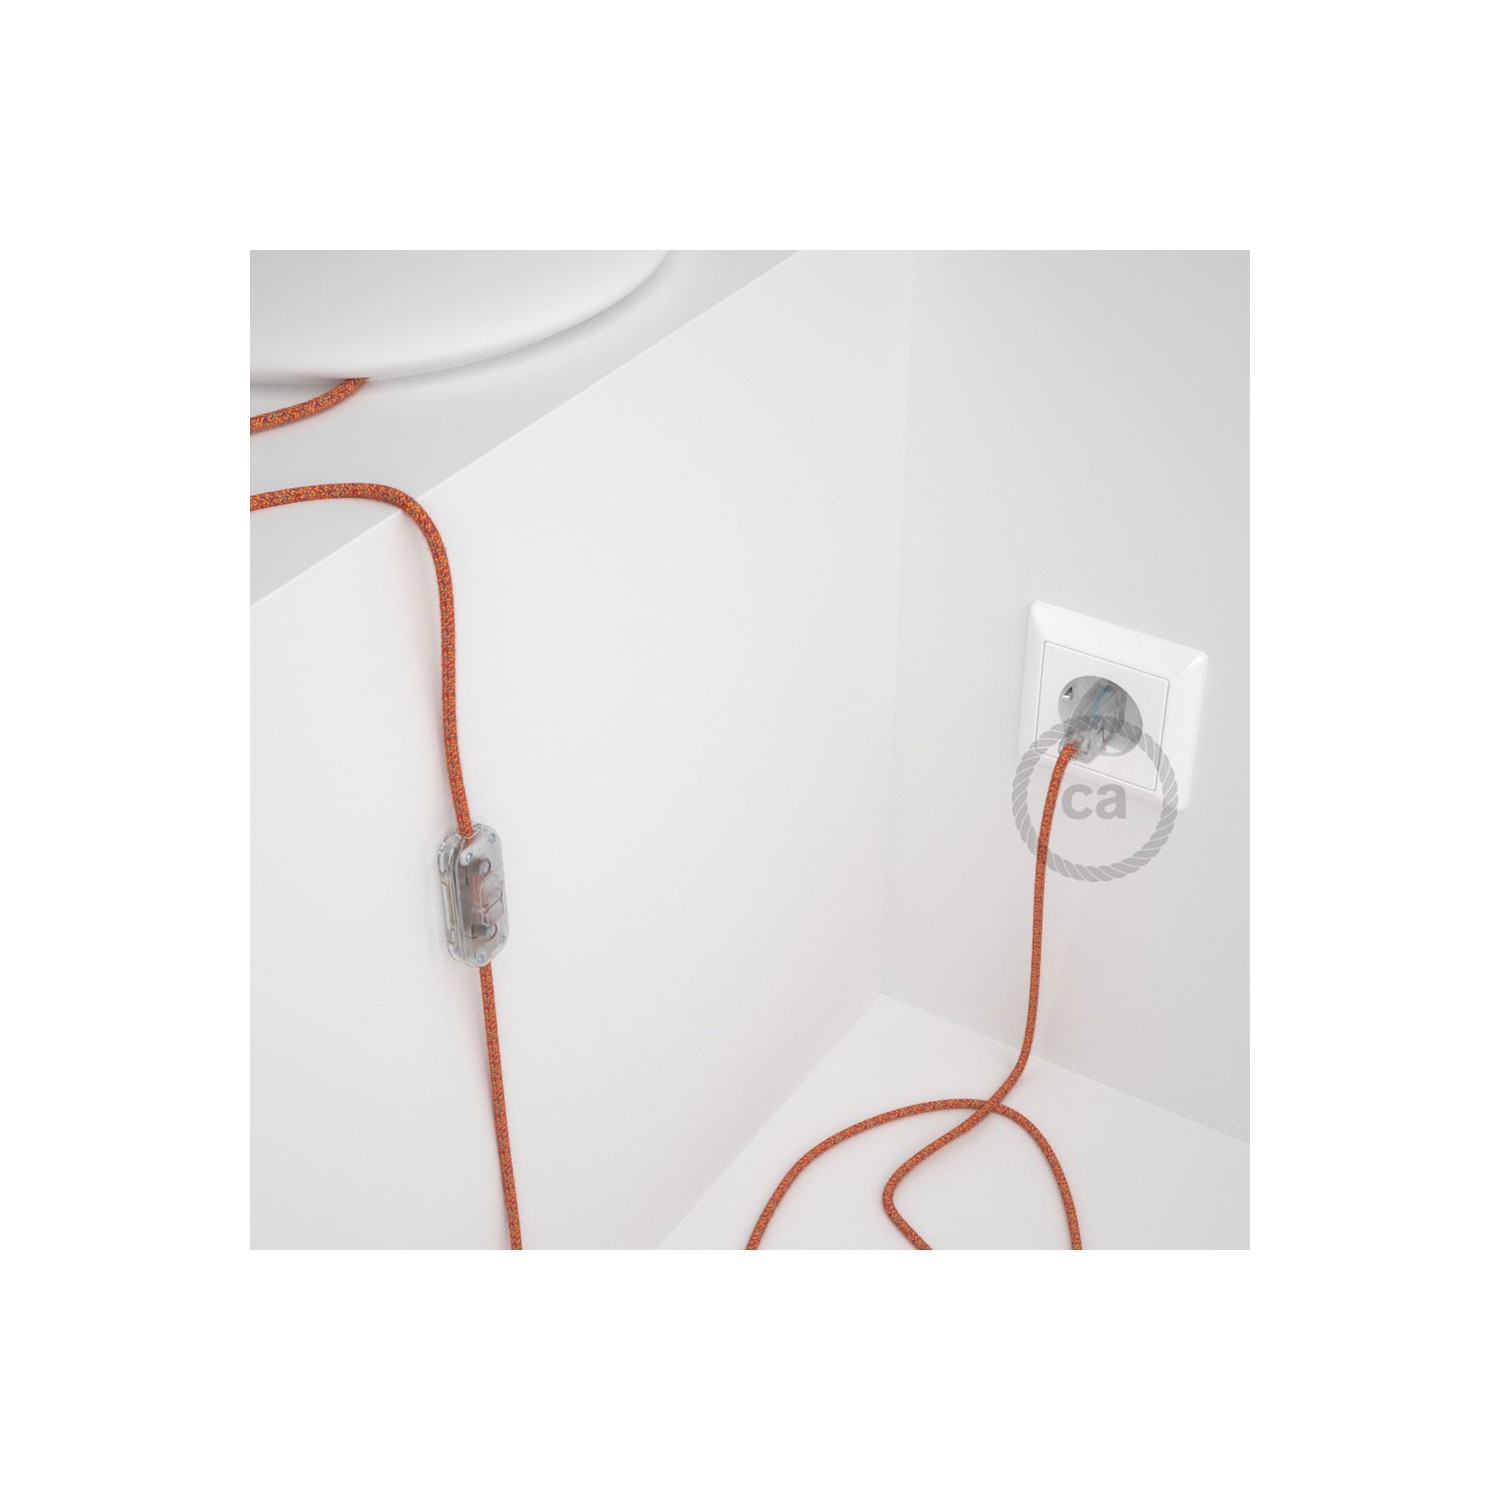 Lamp wiring, RX07 Indian Summer Cotton 1,80 m. Choose the colour of the switch and plug.